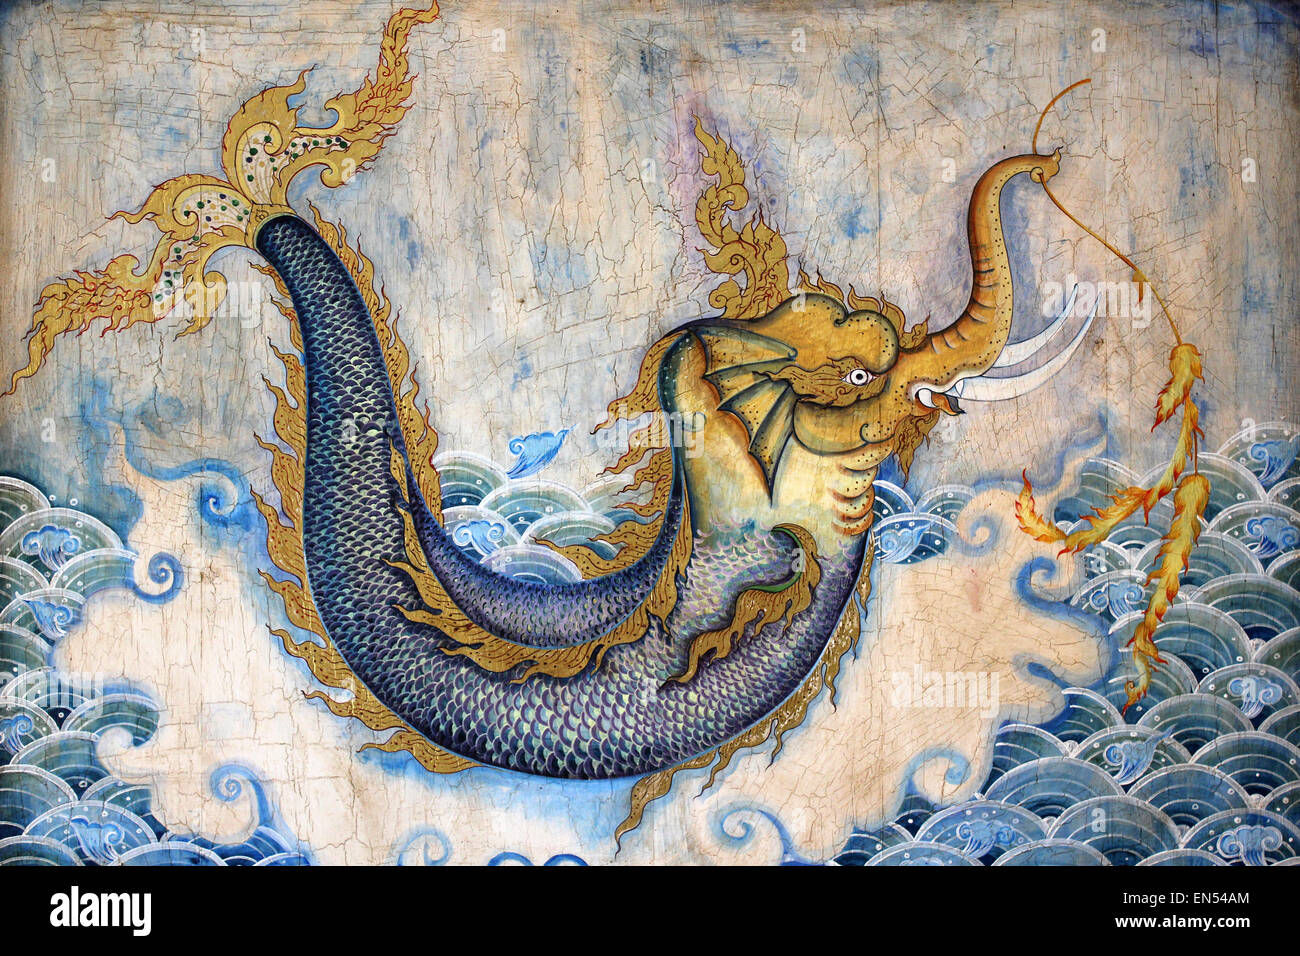 Waree Kunchorn A Thai Mythical creature With A head Of An Elephant And A Tail Of A Fish Stock Photo